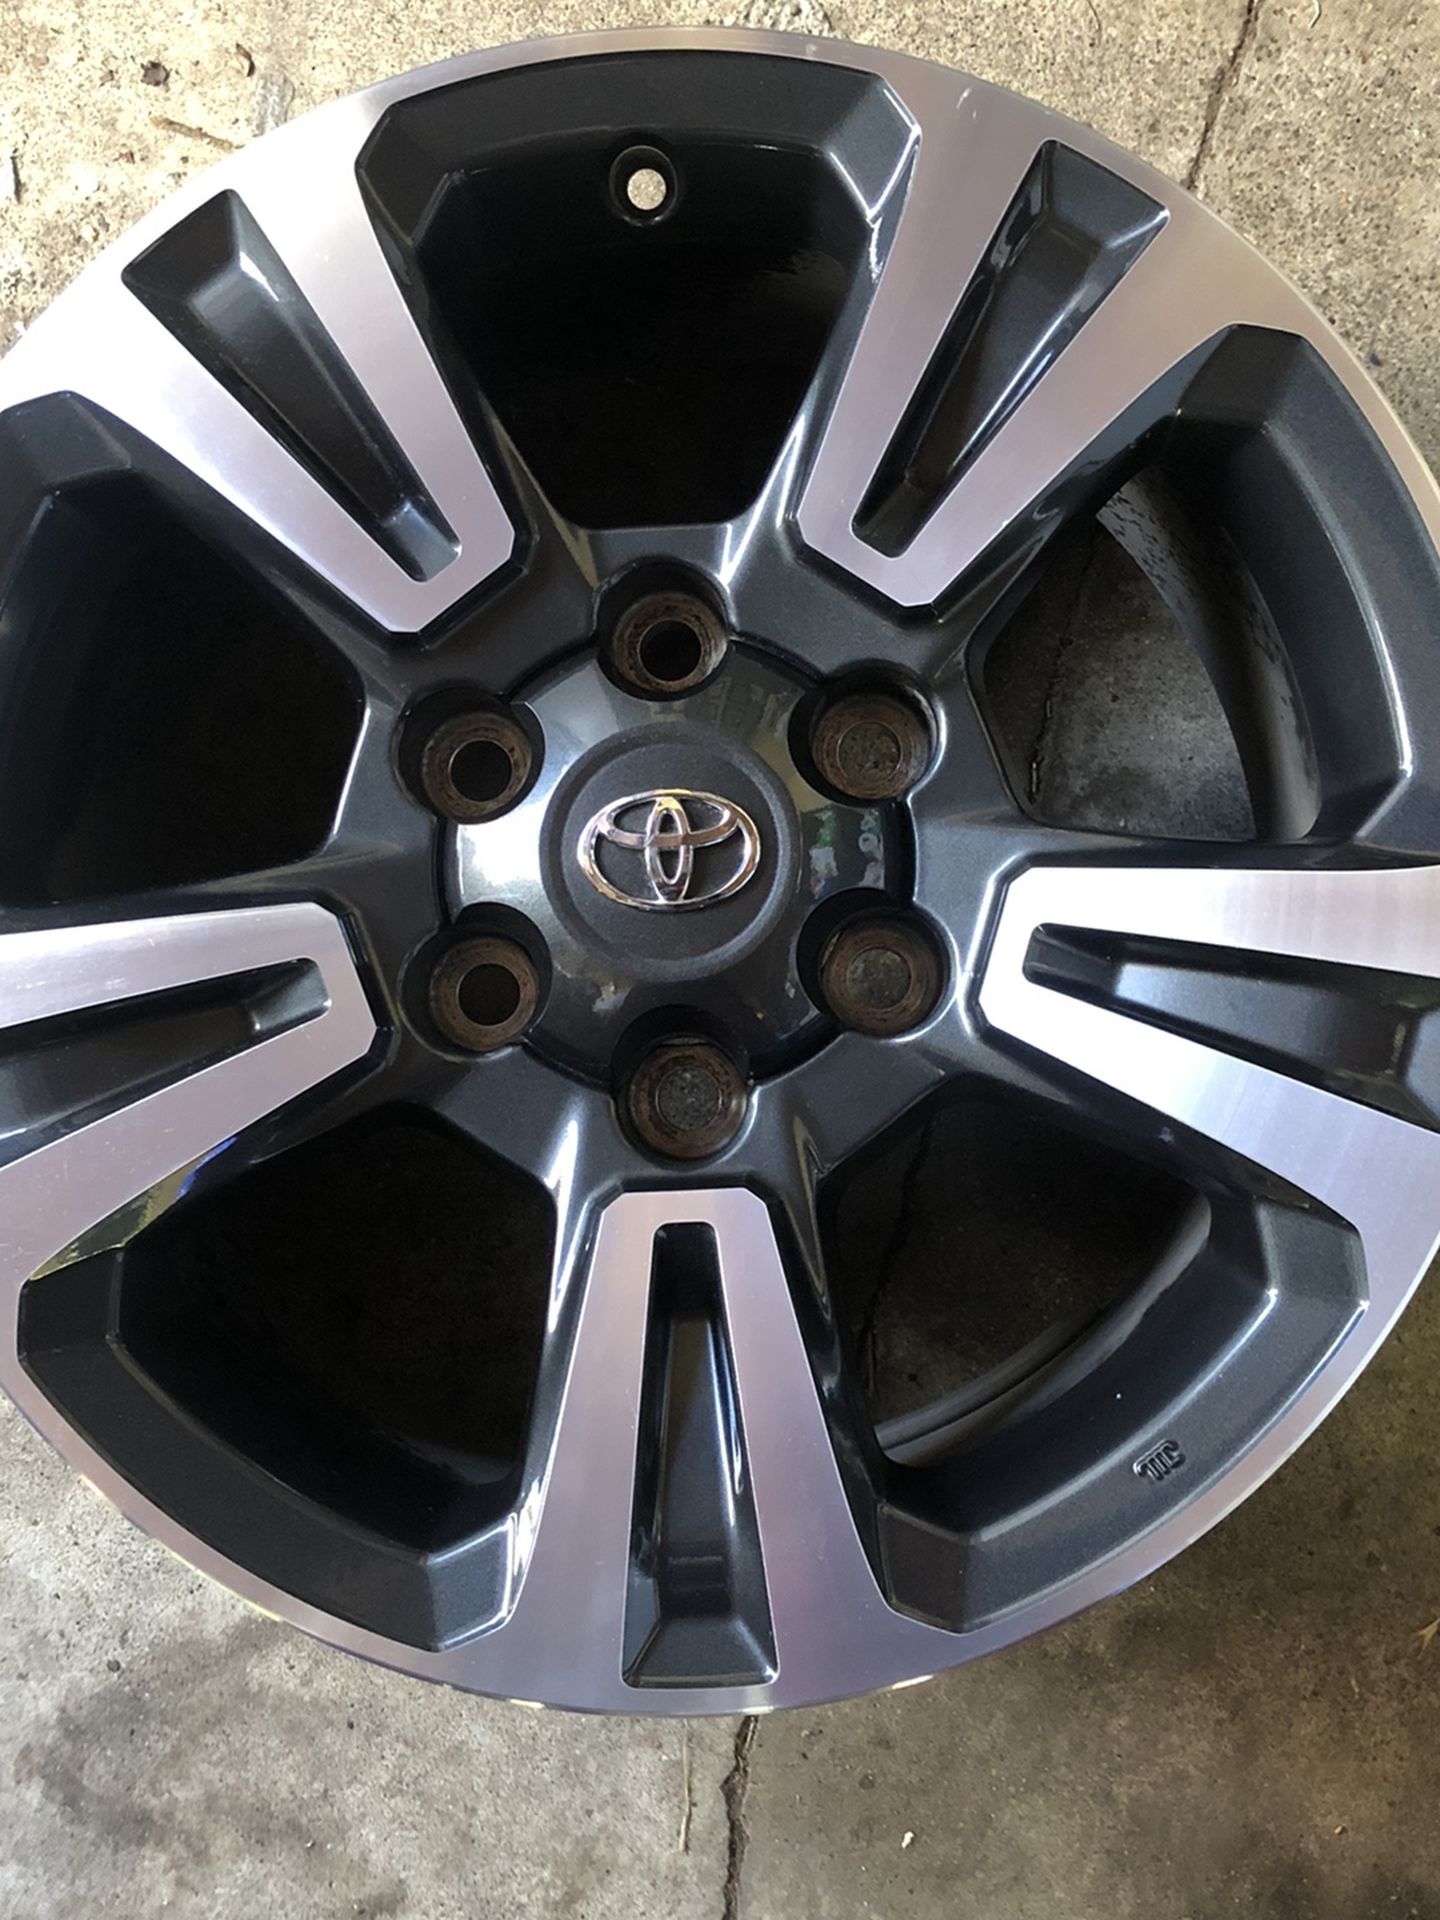 4 RIMS TOYOTA  TRD STOCK SIZE 17 THEY FIT TACOMA SEQUOIA 4RUNNER SEQUOIA 6  LUGS  GREAT CONDITION 9/10 